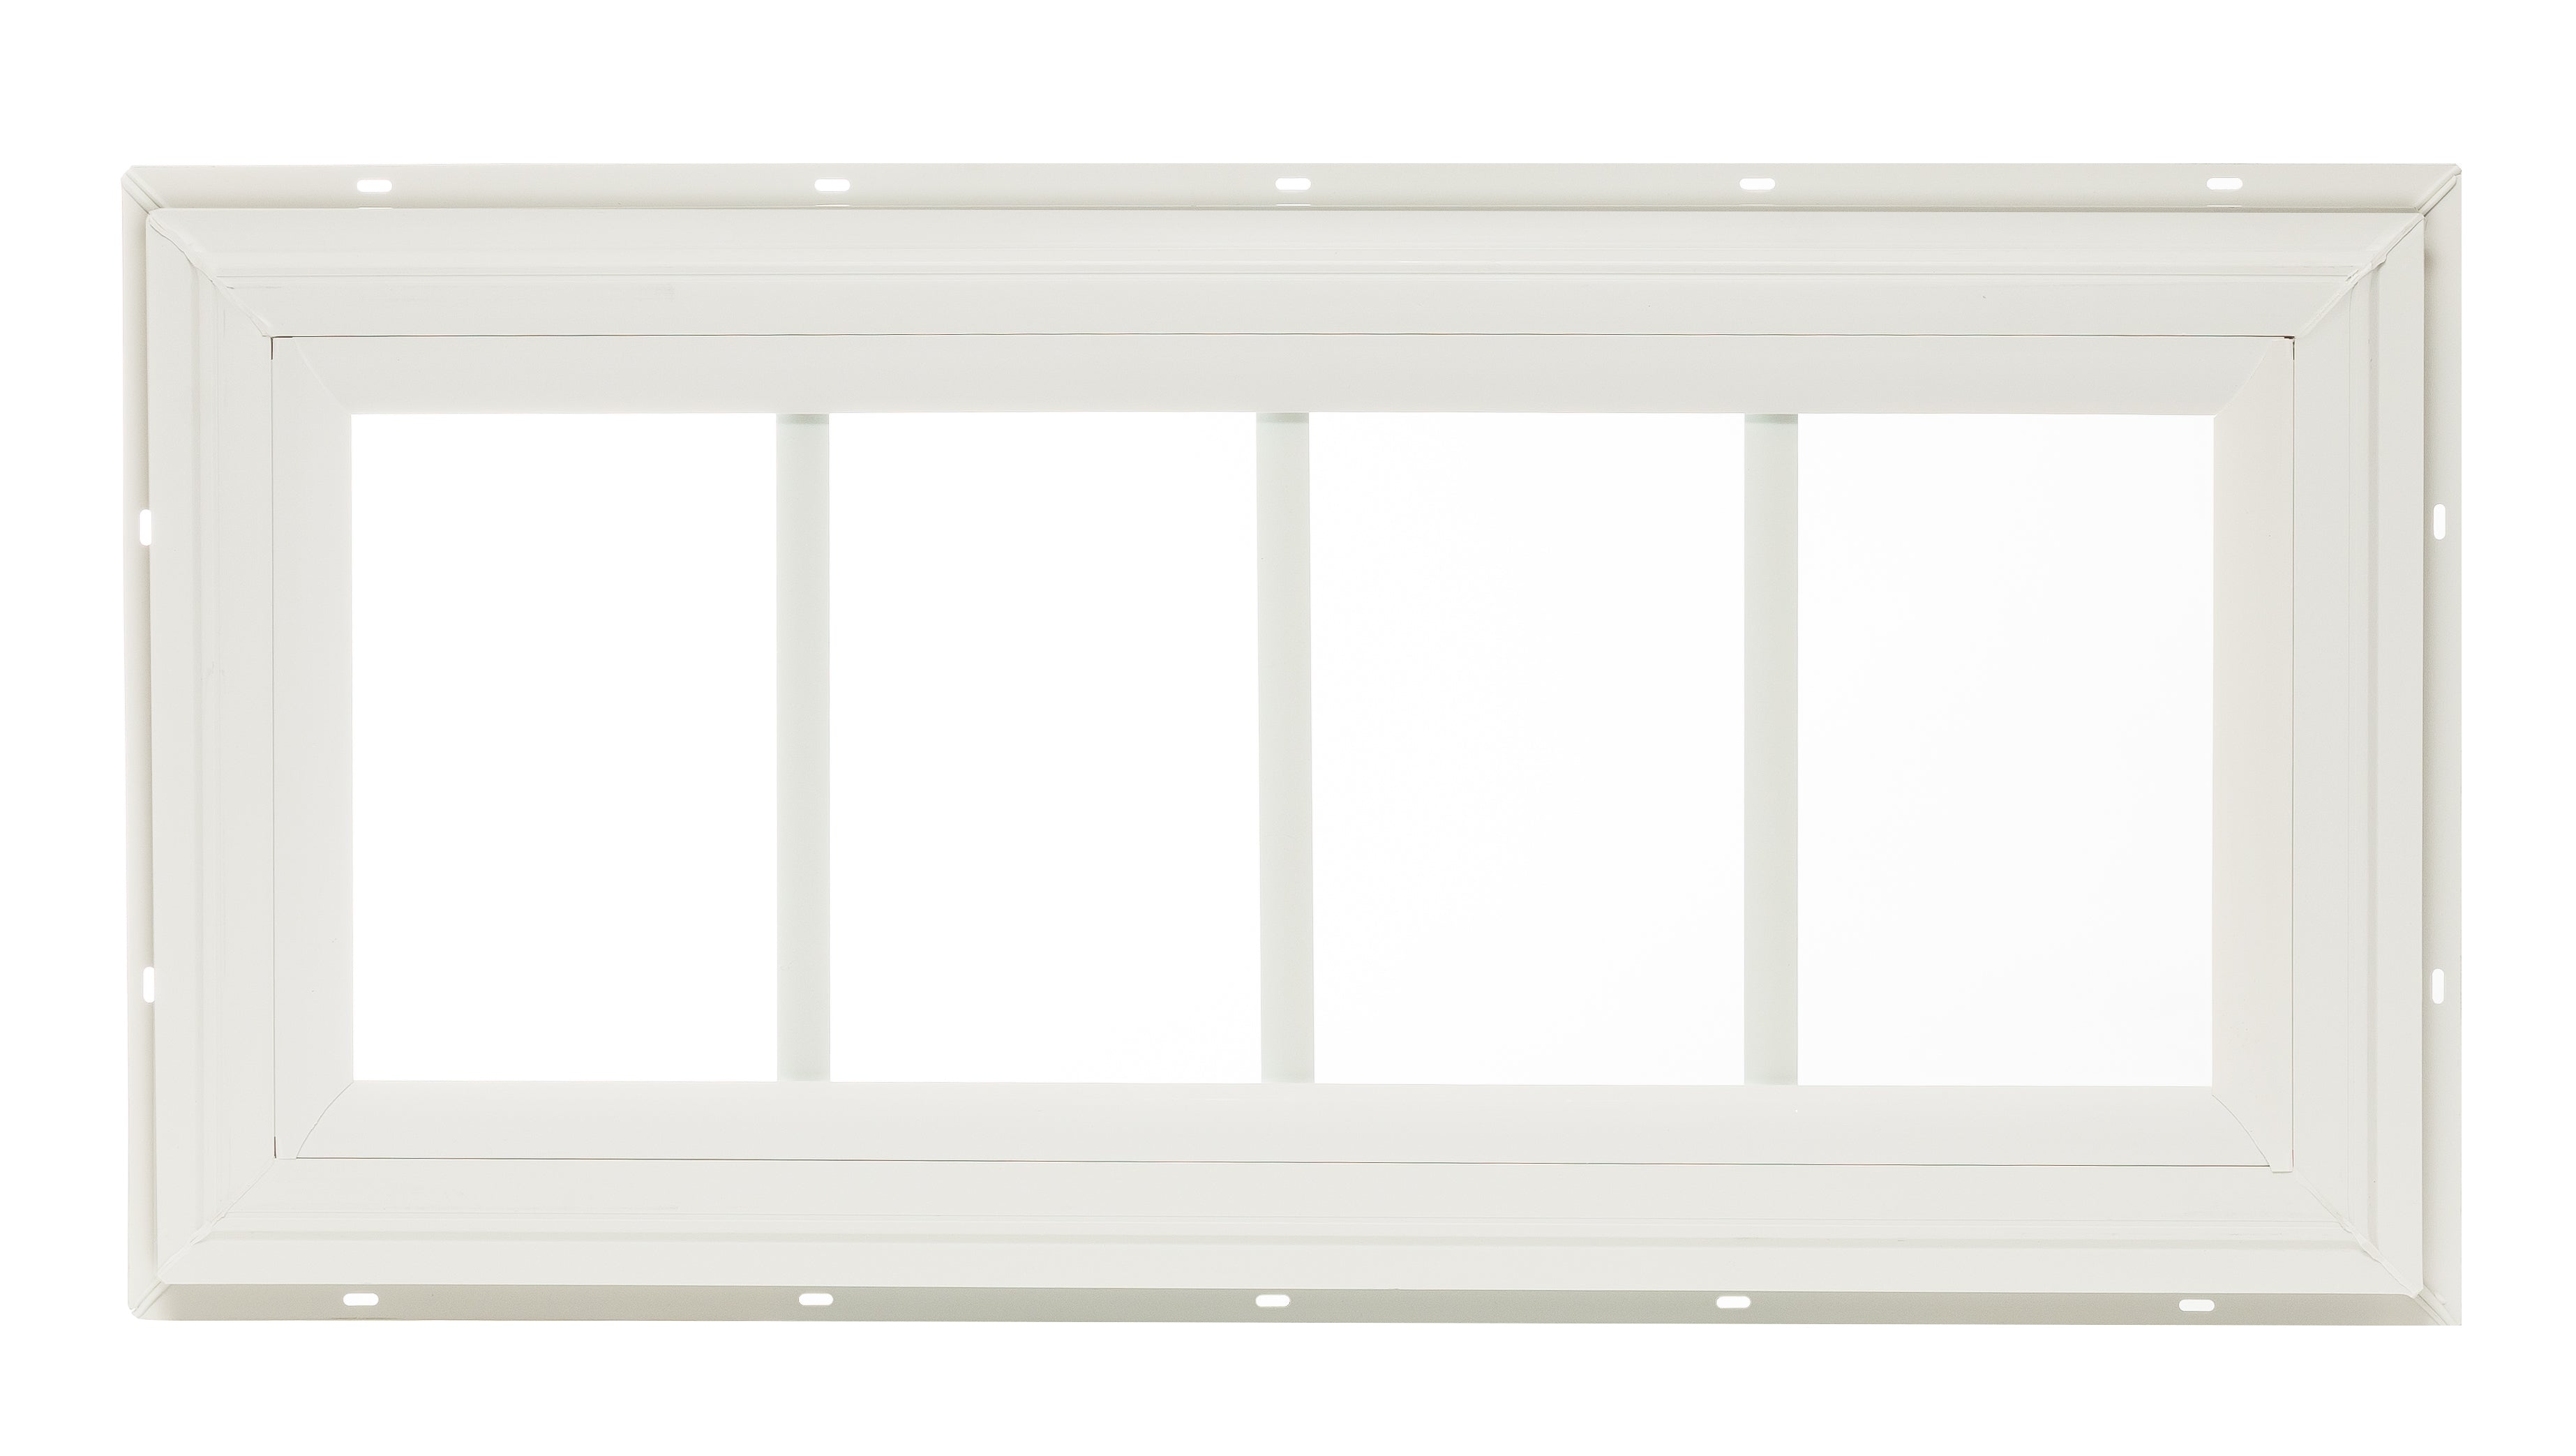 10.185" X 24" Transom J-Lap PVC White Window for Sheds, Playhouses, and MORE 1 PK